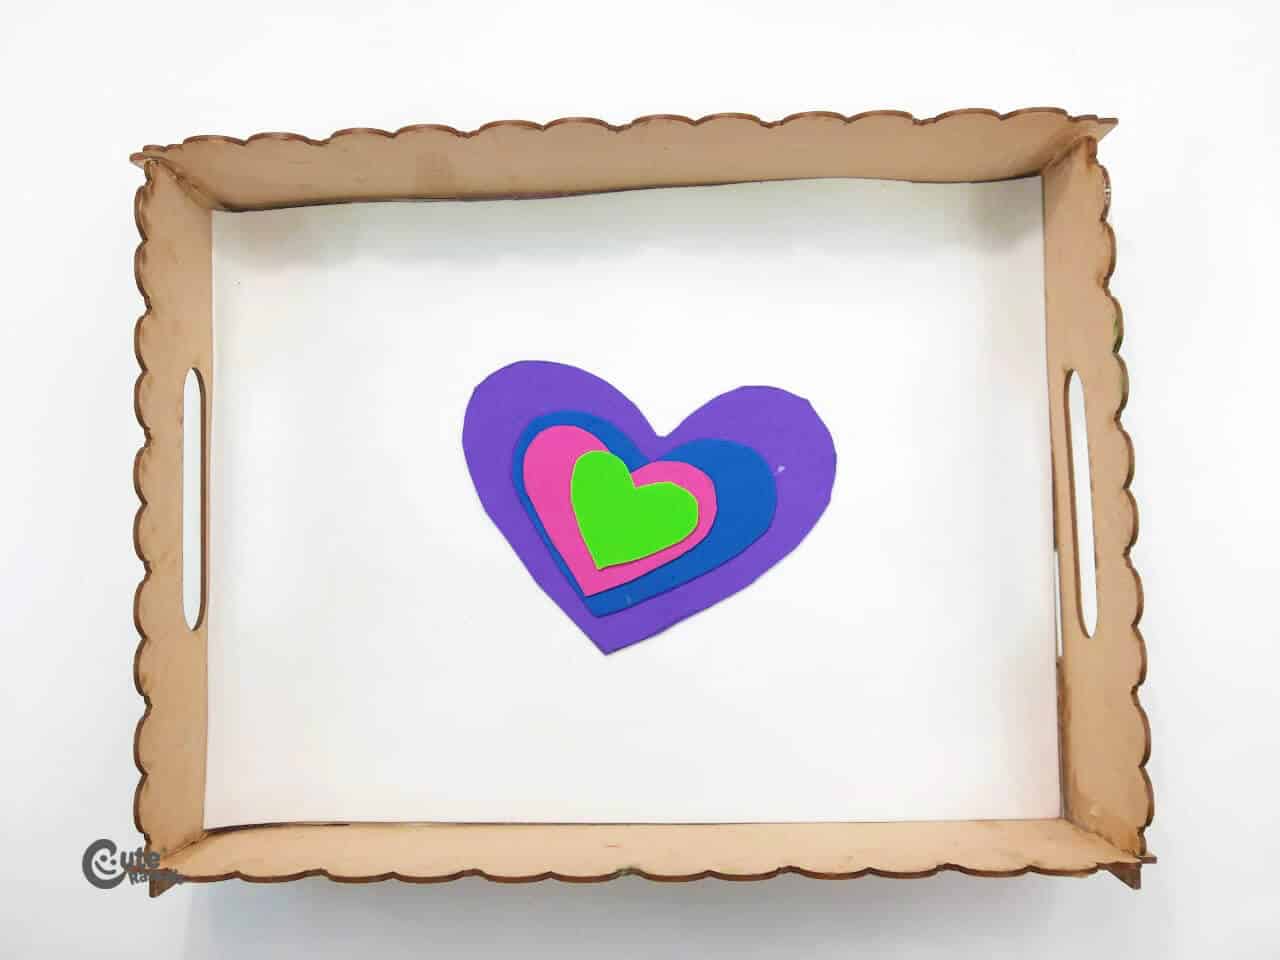 Colorful Hearts Motor Skill Crafts for Preschoolers Activity